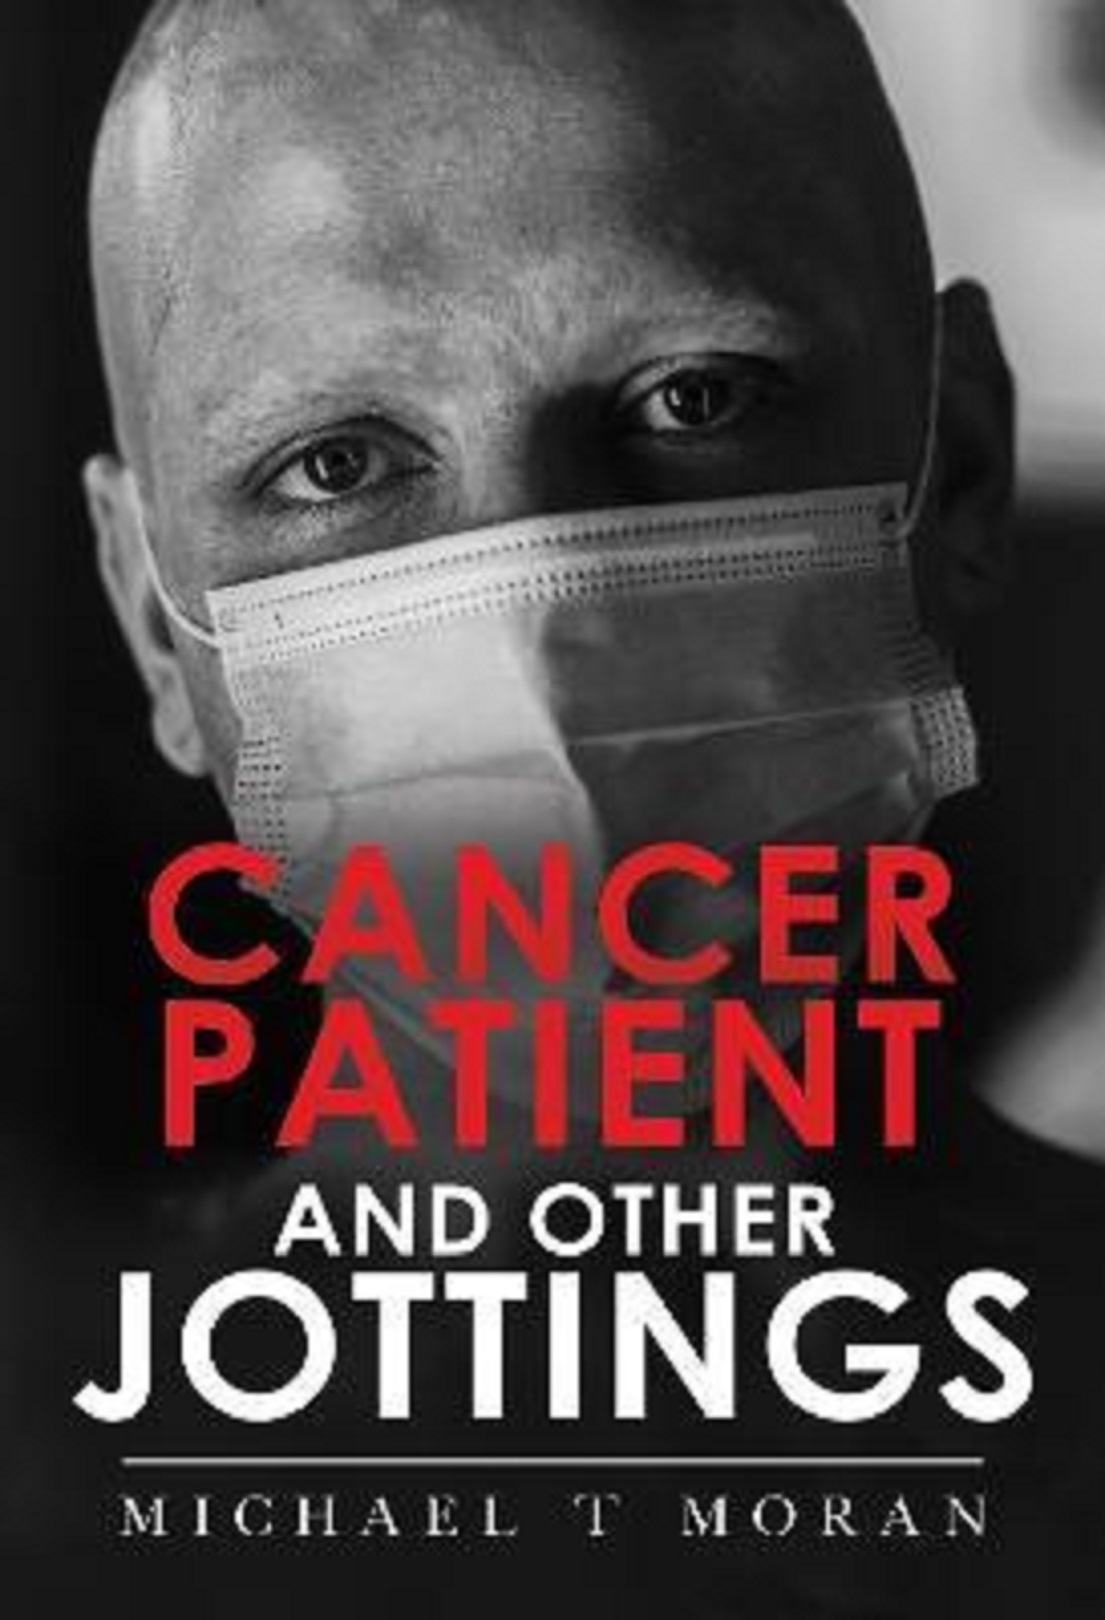 Cancer Patient and Other Jottings